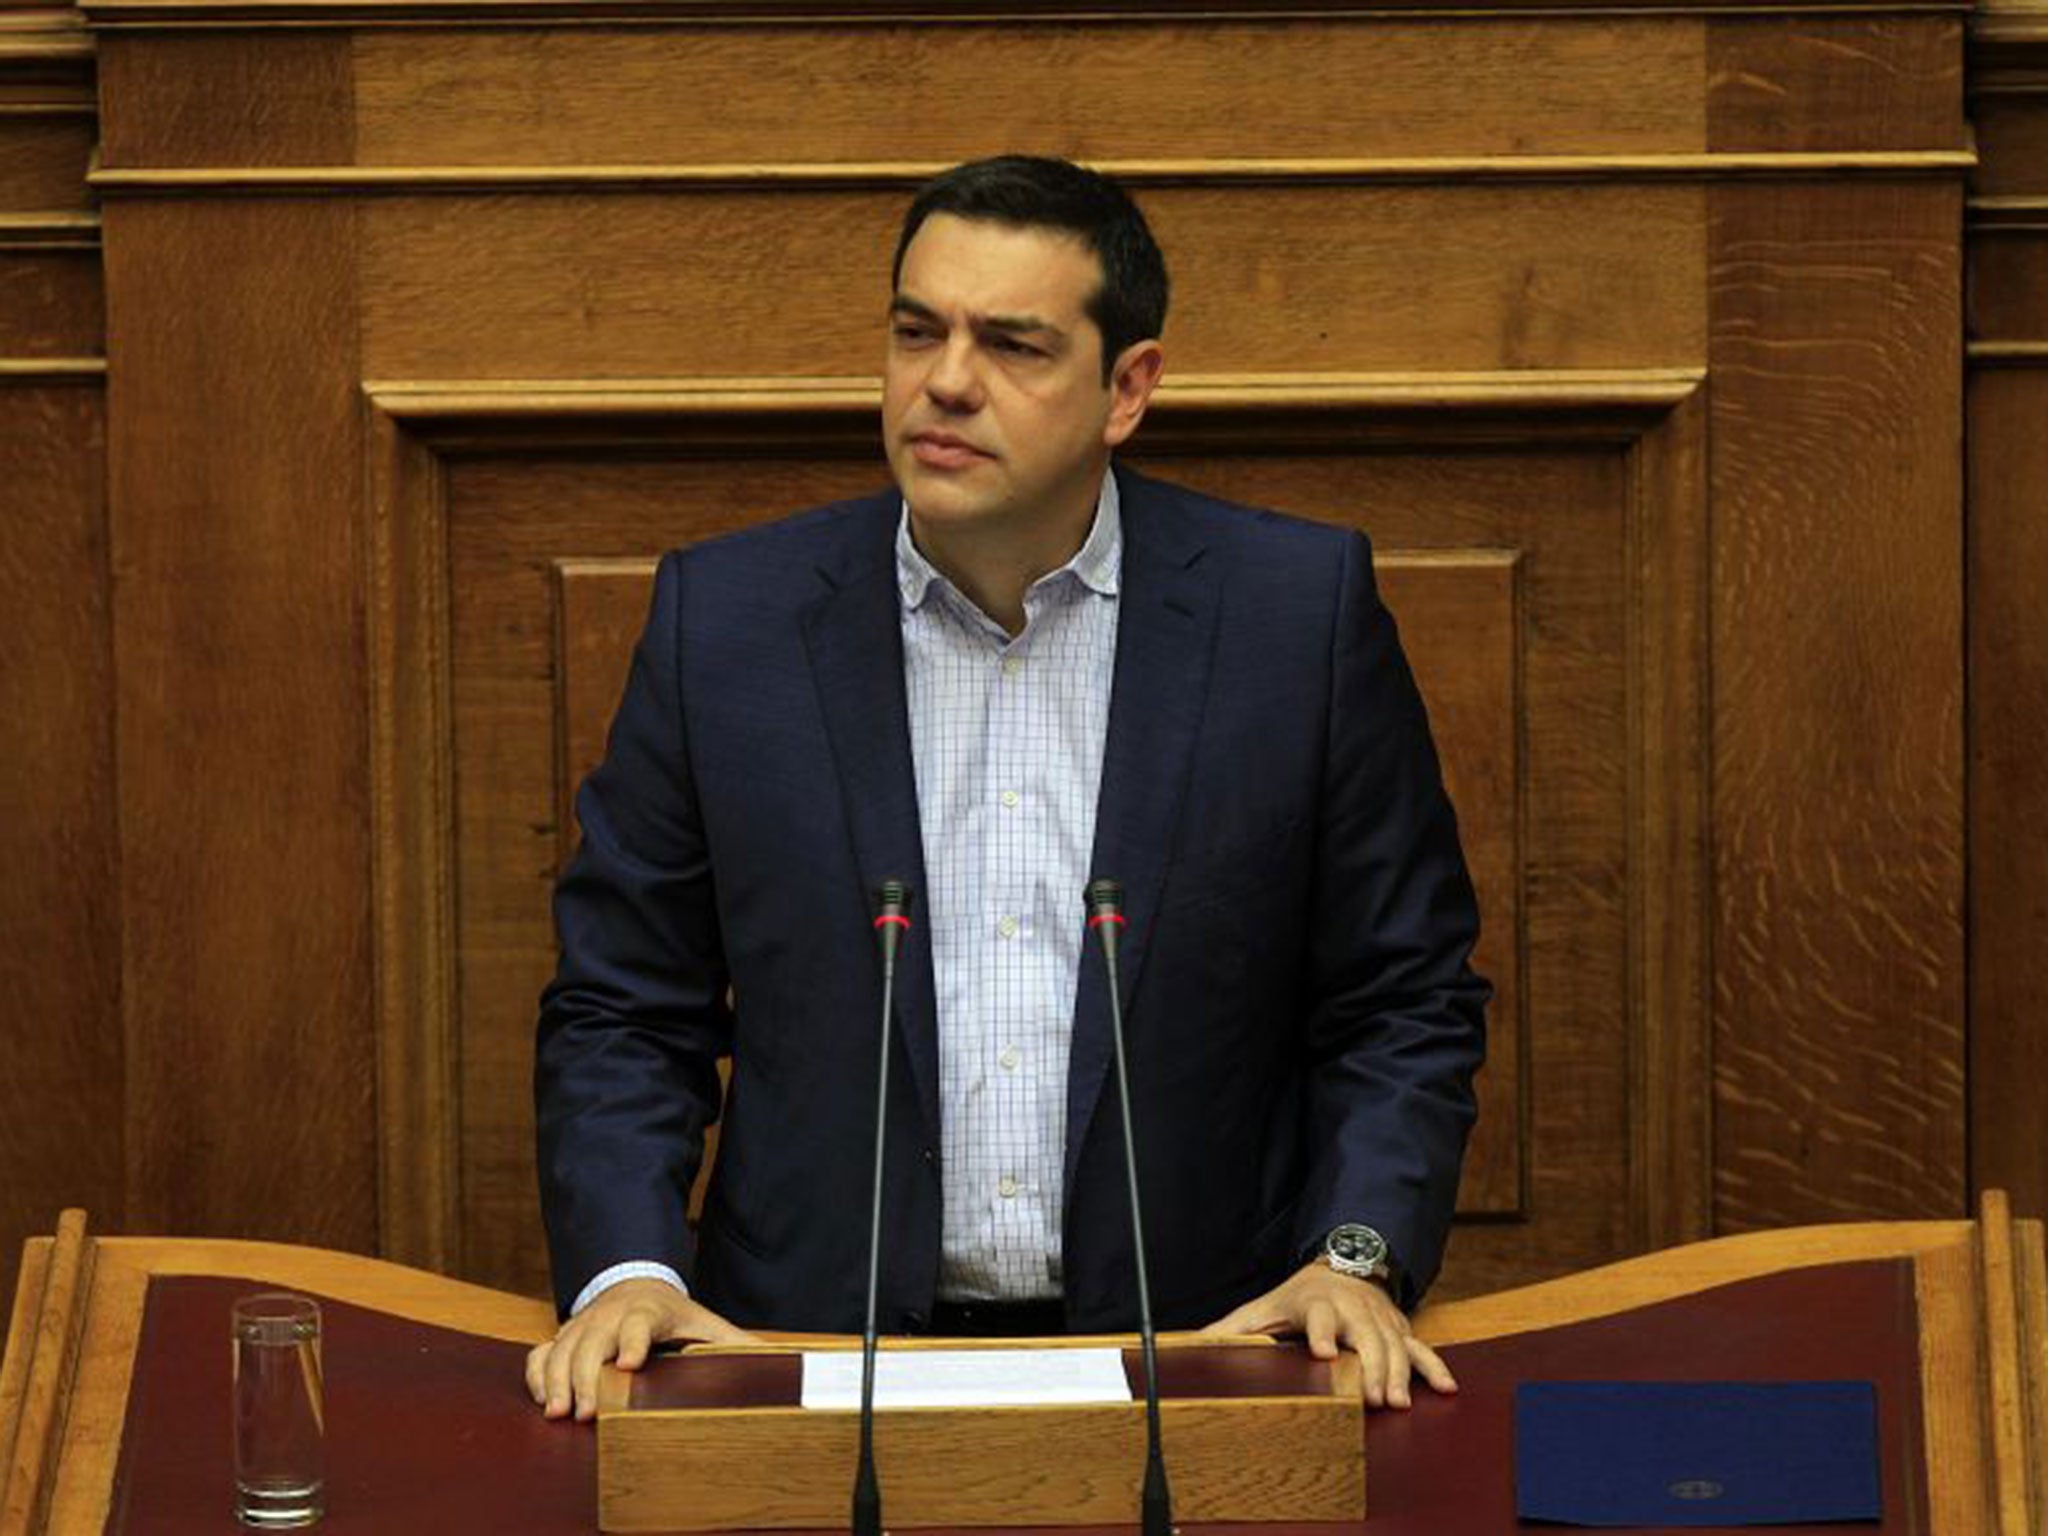 Alexis Tsipras speaks in the Parliament during Prime Minister's Question Time, in Athens, Greece, 31 July 2015.